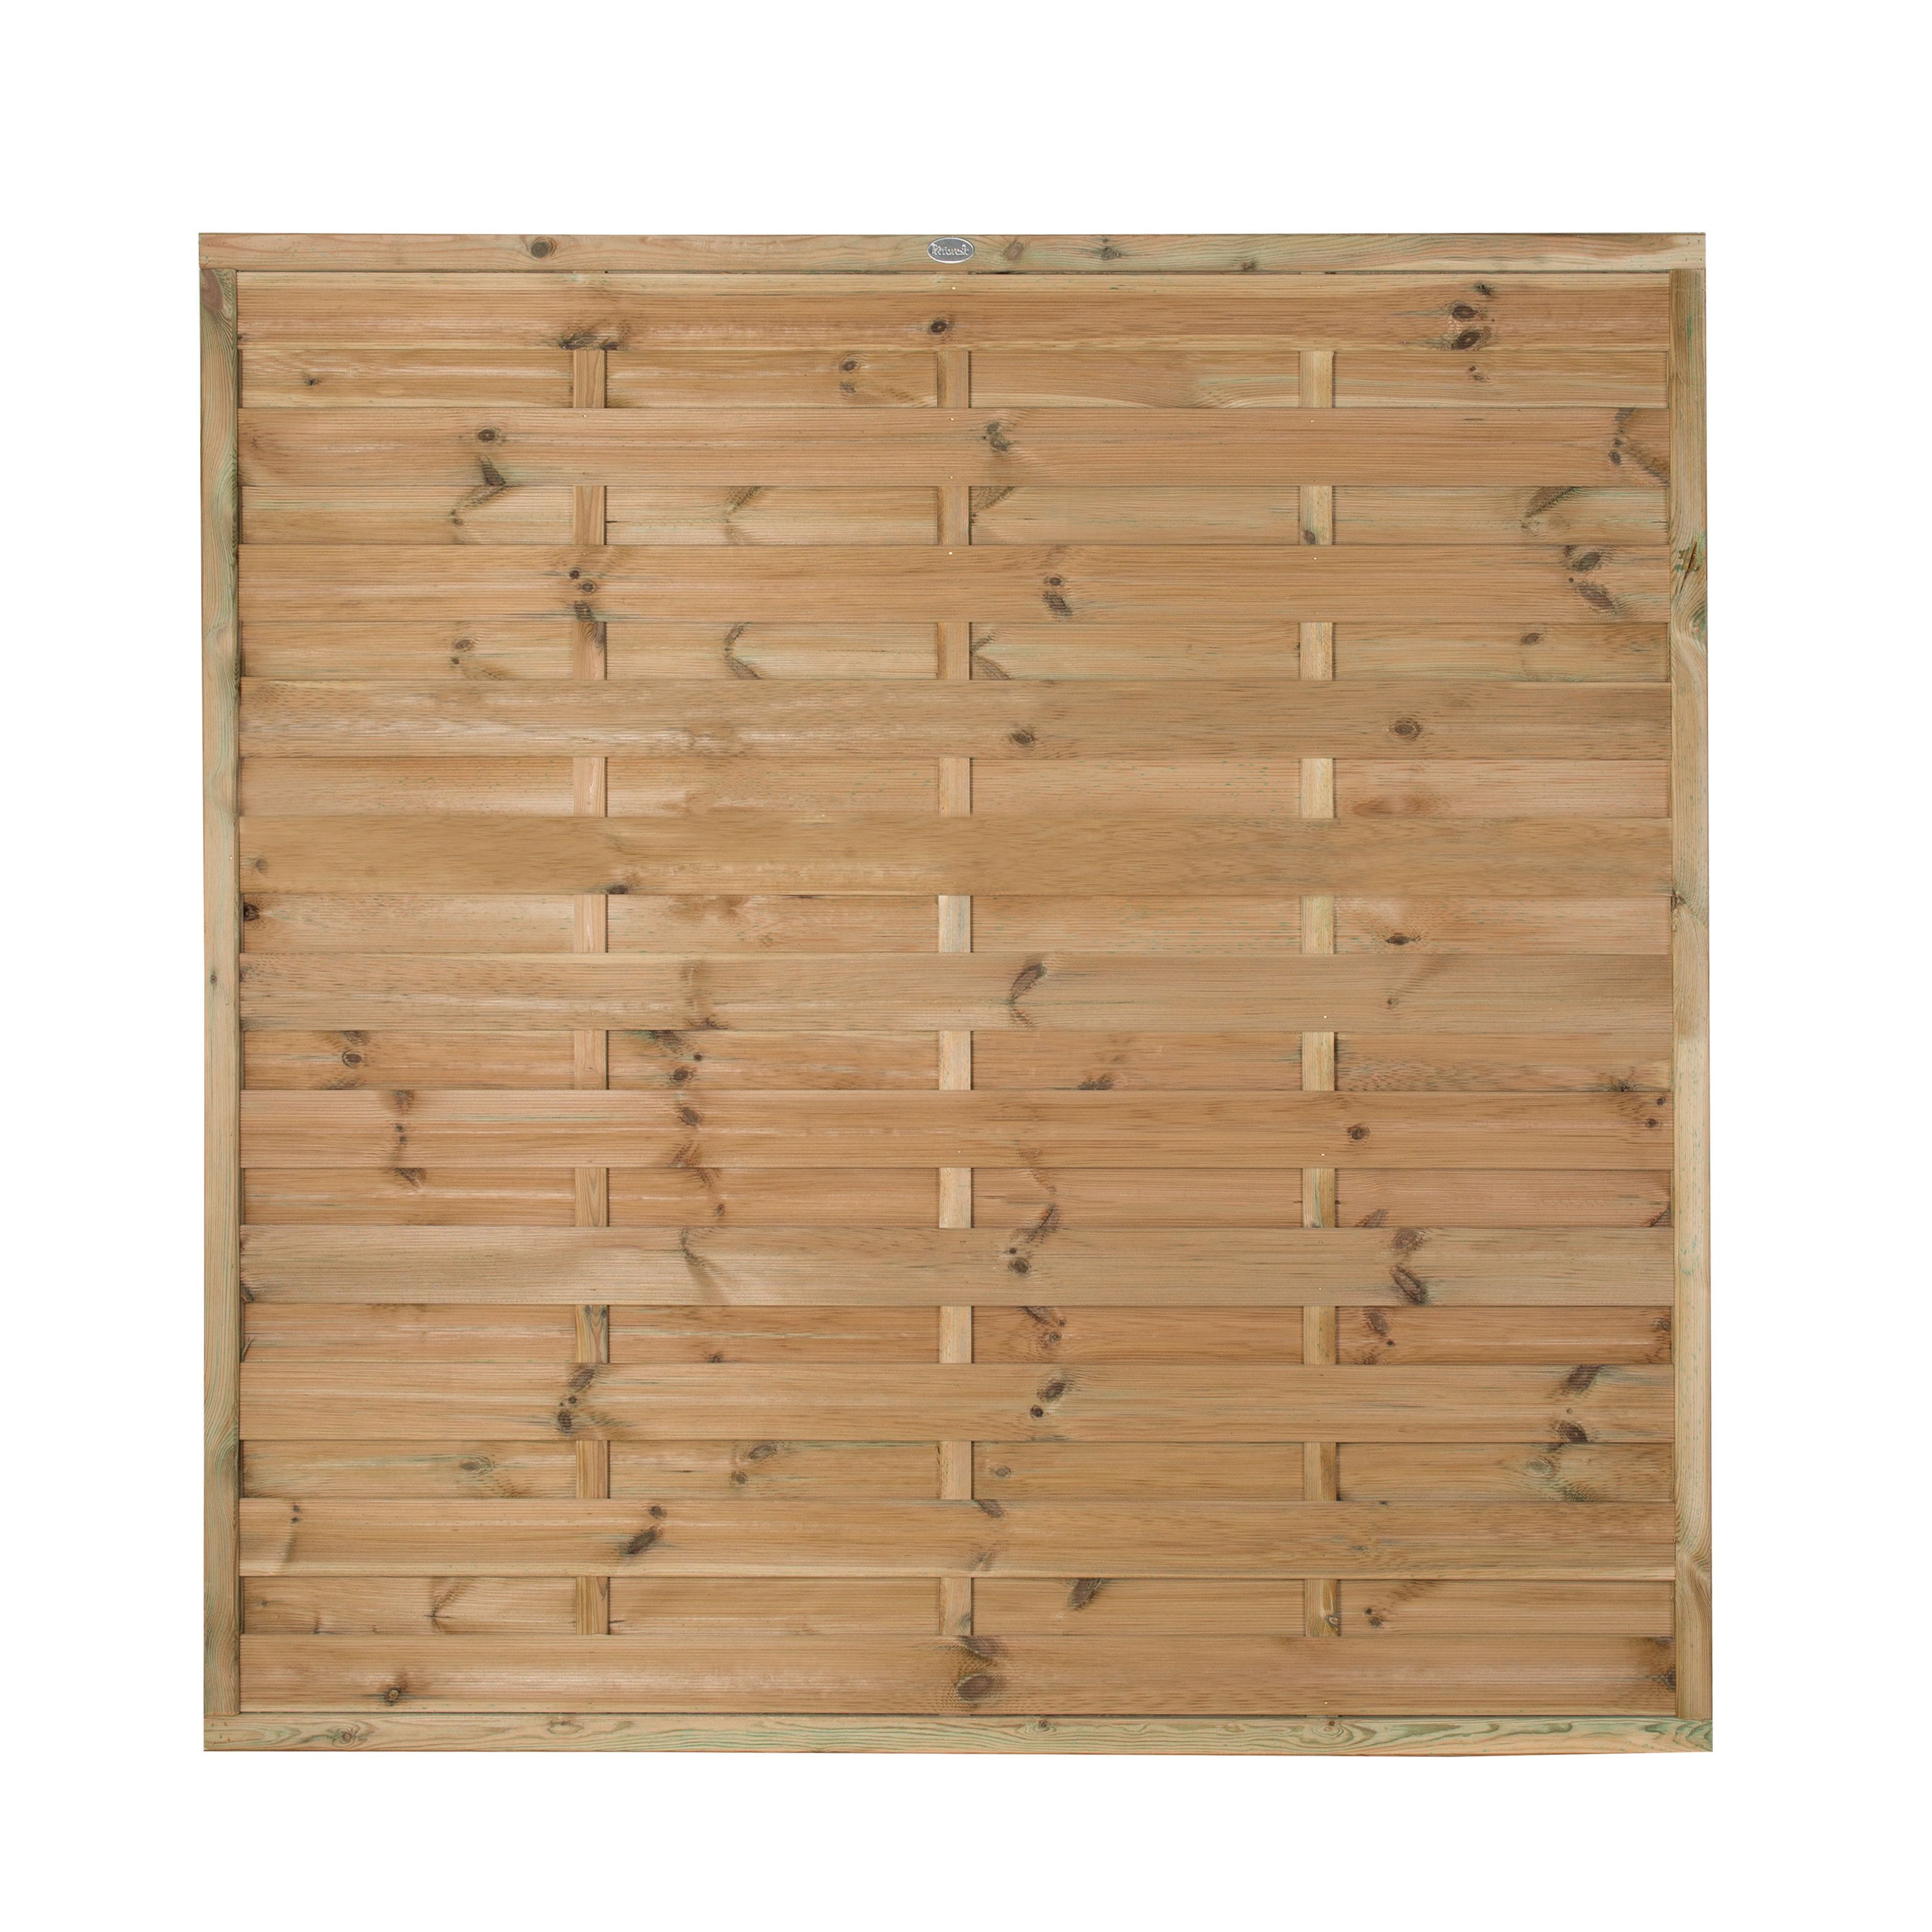 Forest Garden Pressure Treated Horizontal Hit & Miss Fence Panel 1800 x 1800mm 6 x 6ft Multi Packs